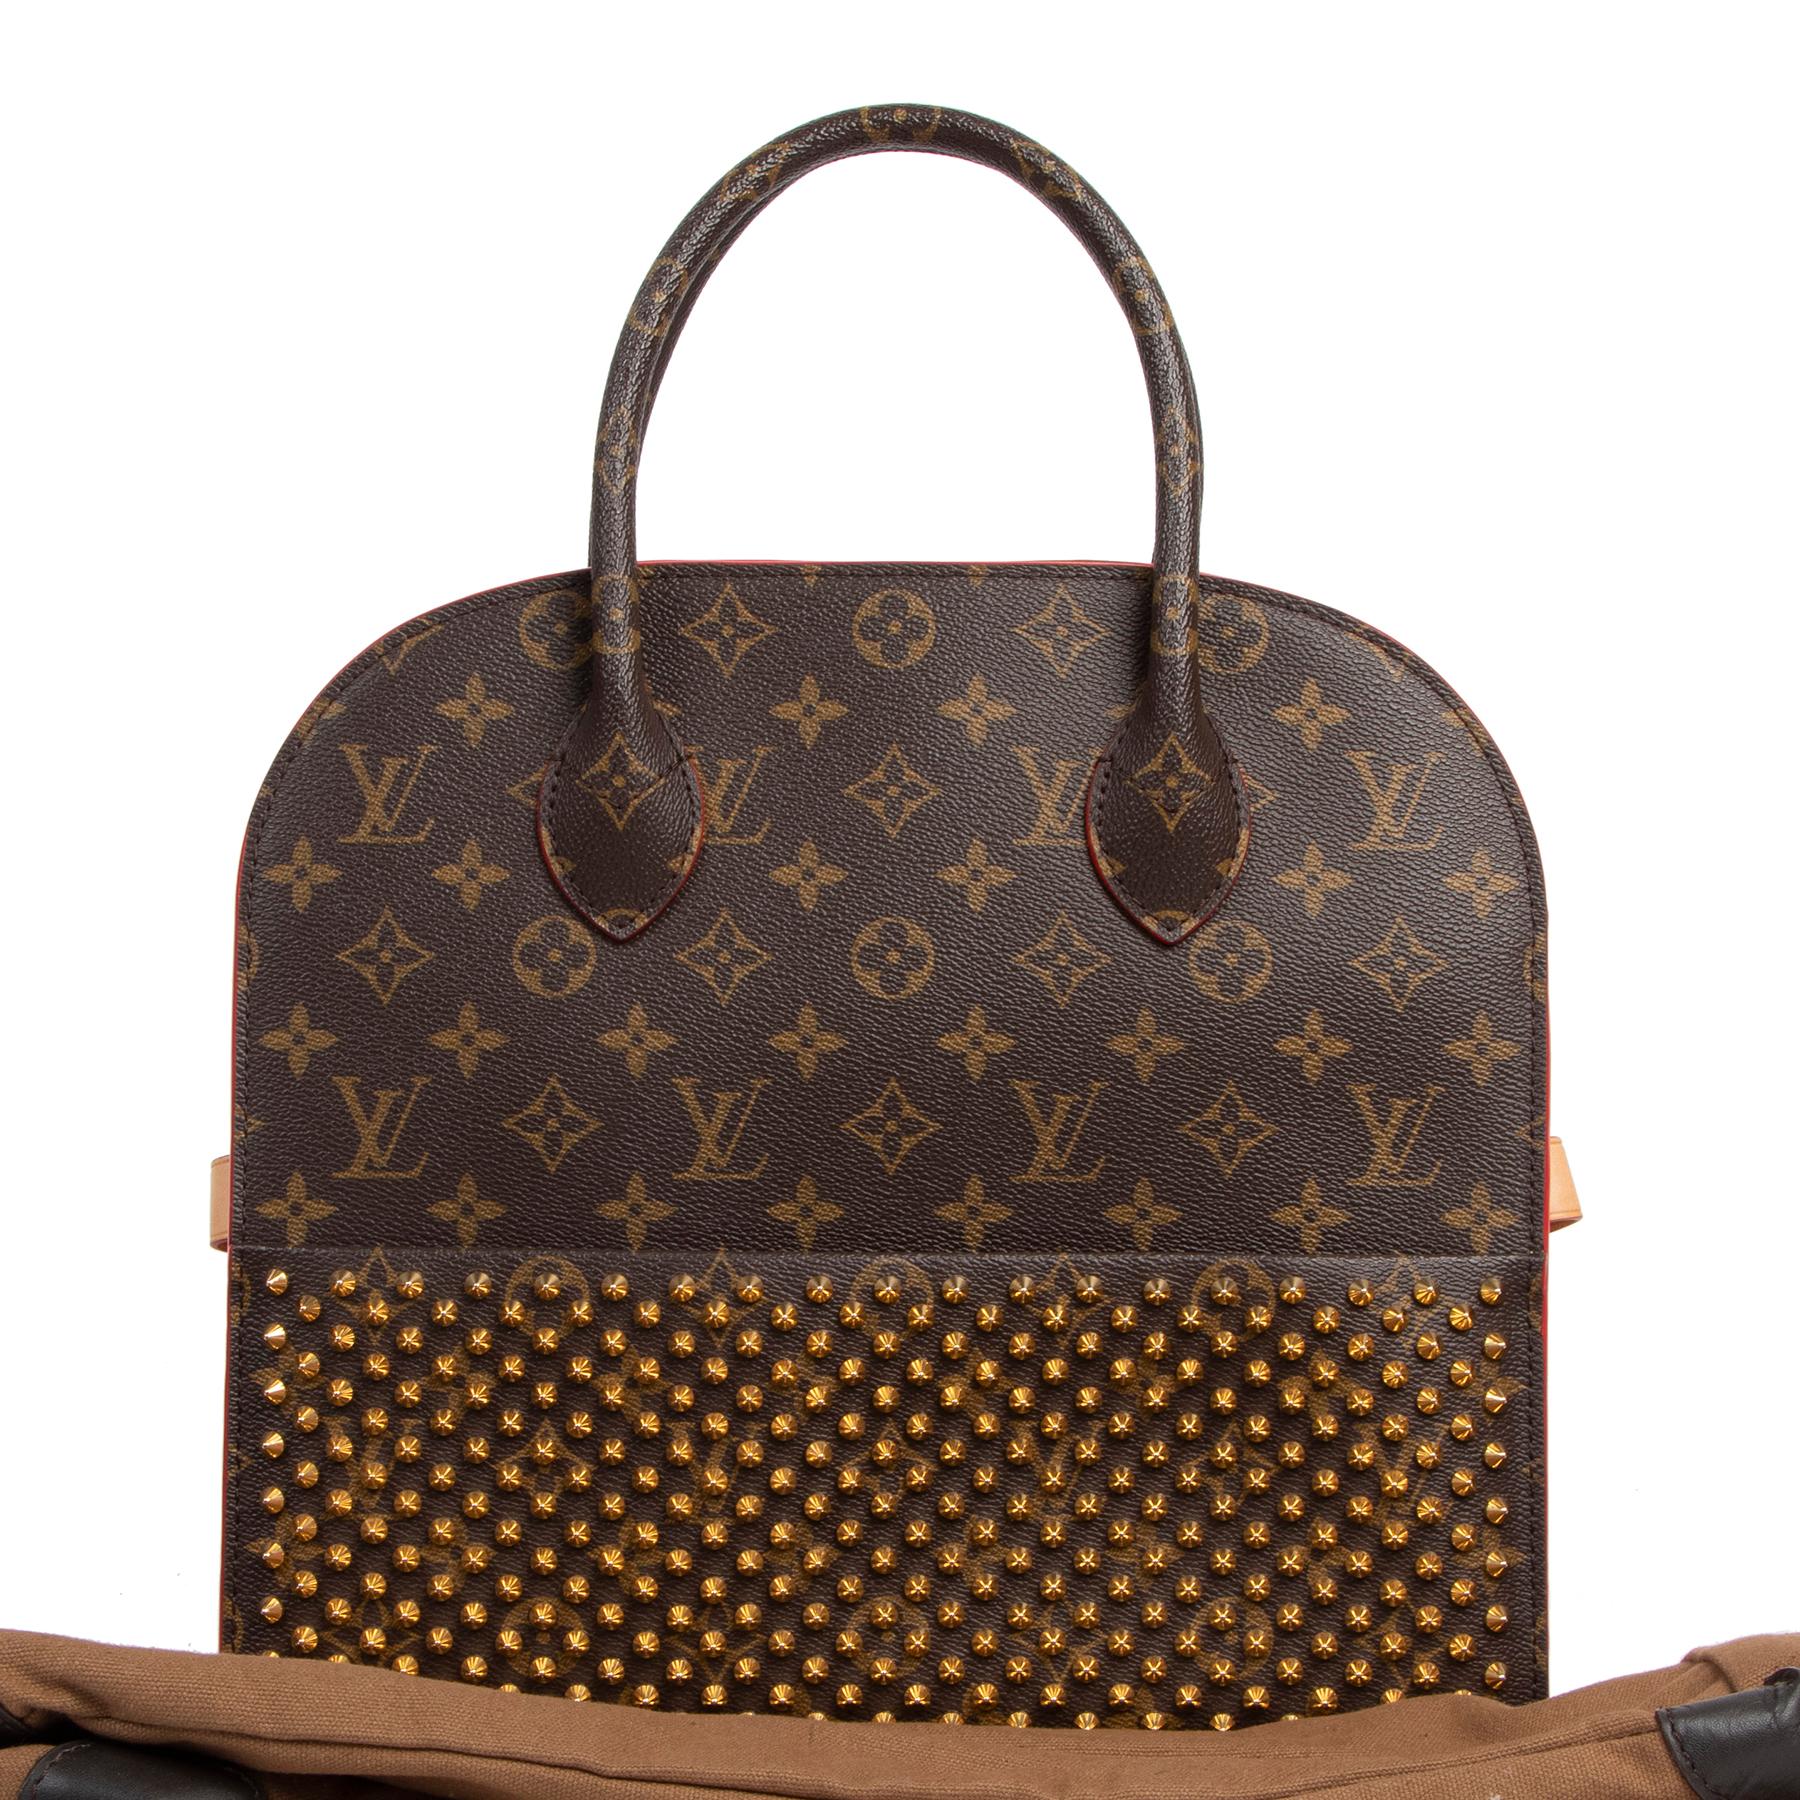 LOUIS VUITTON PRESENTS ICONS & ICONOCLASTS : A CELEBRATION OF THE MONOGRAM